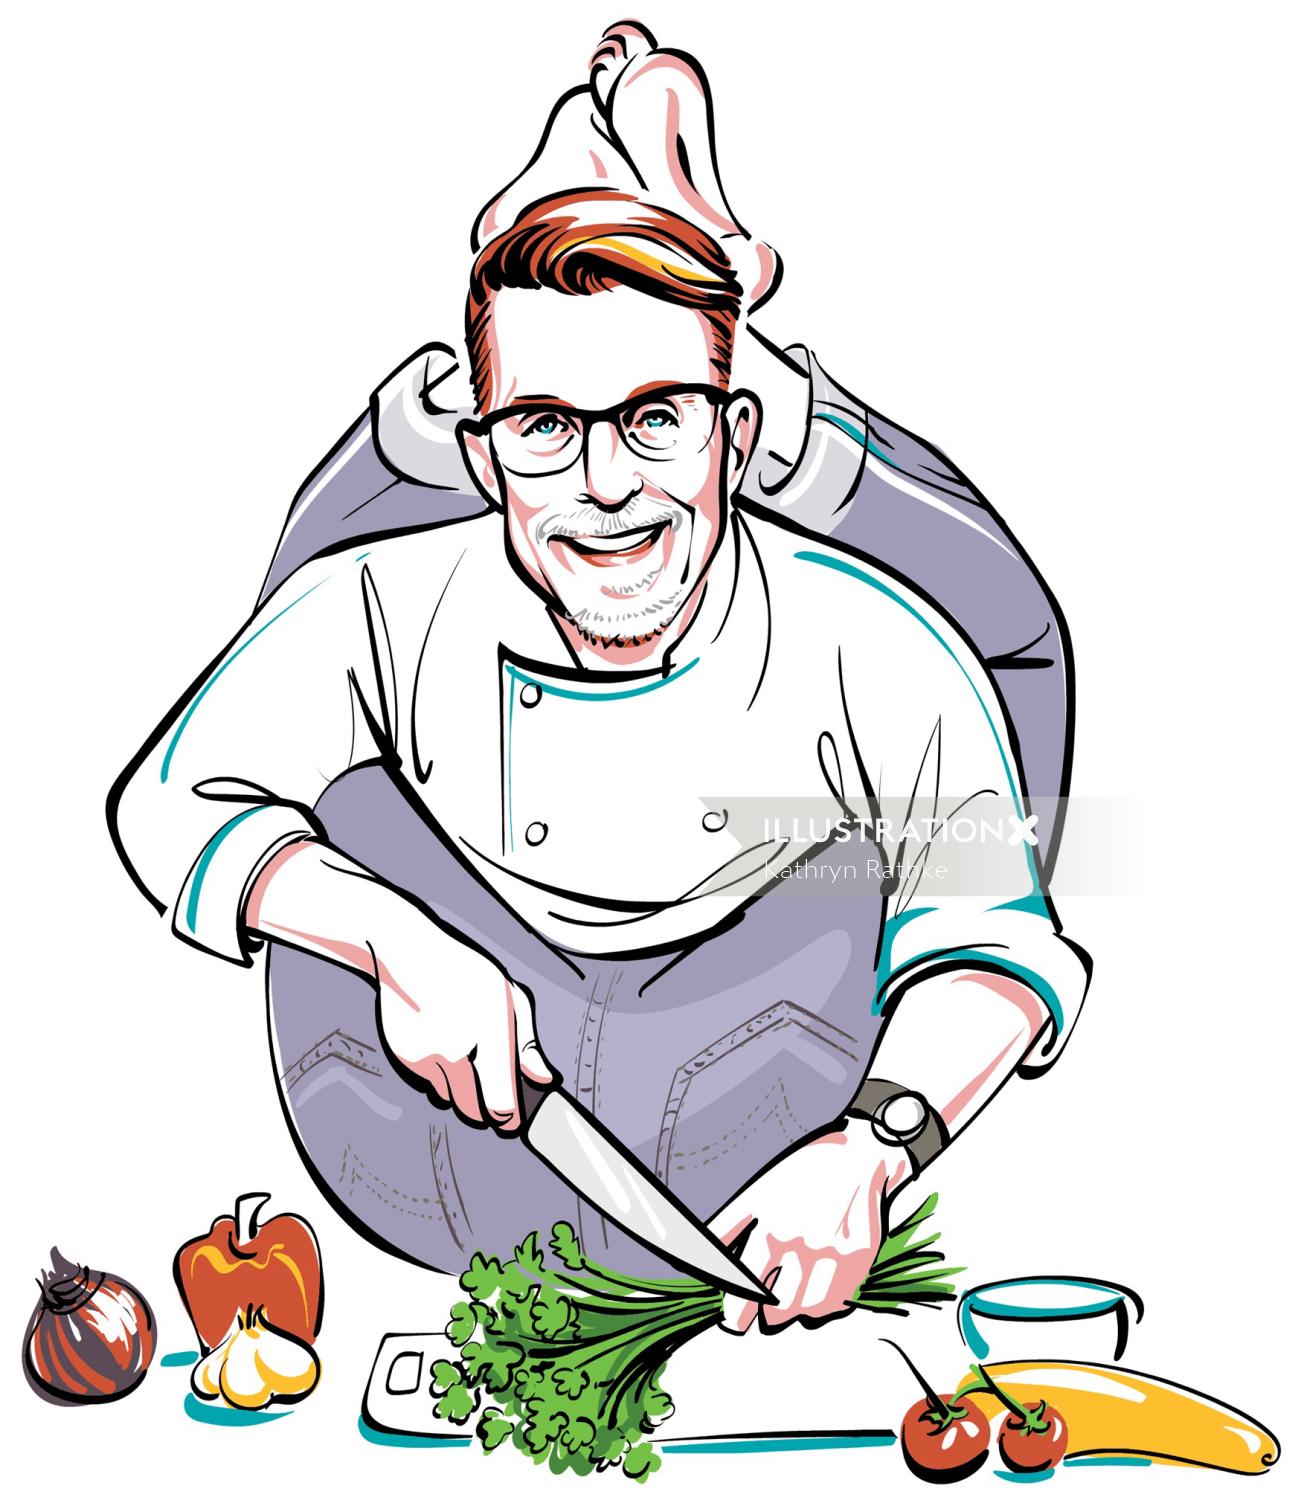 Portrait of Rick Bayless is an American chef specializes in Mexican cuisine